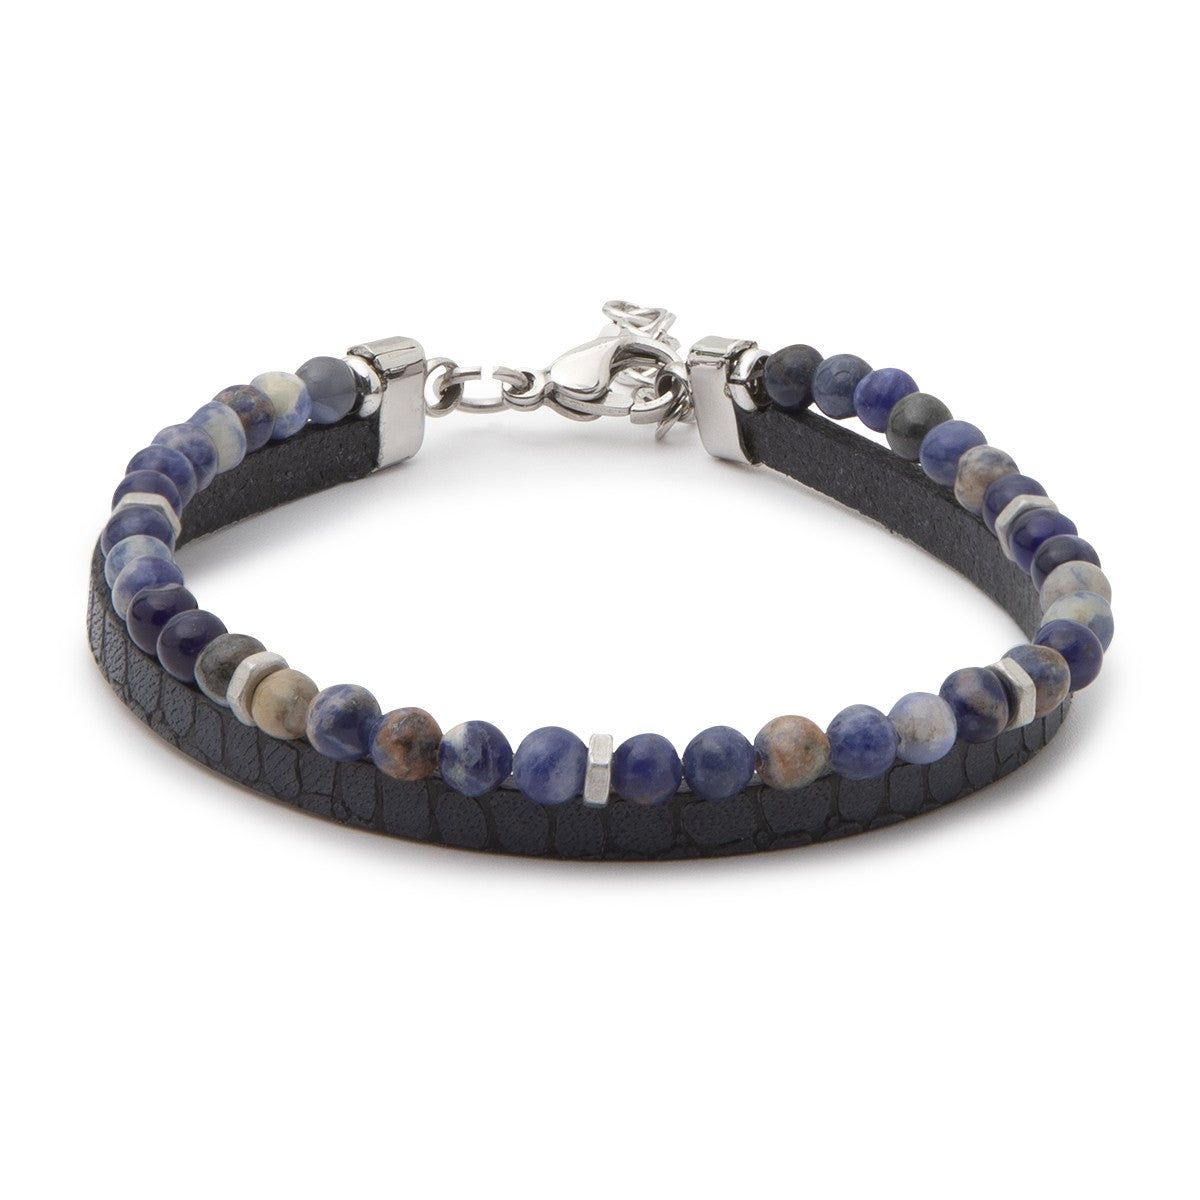 LEATHER AND BLUE STONES BRACELET